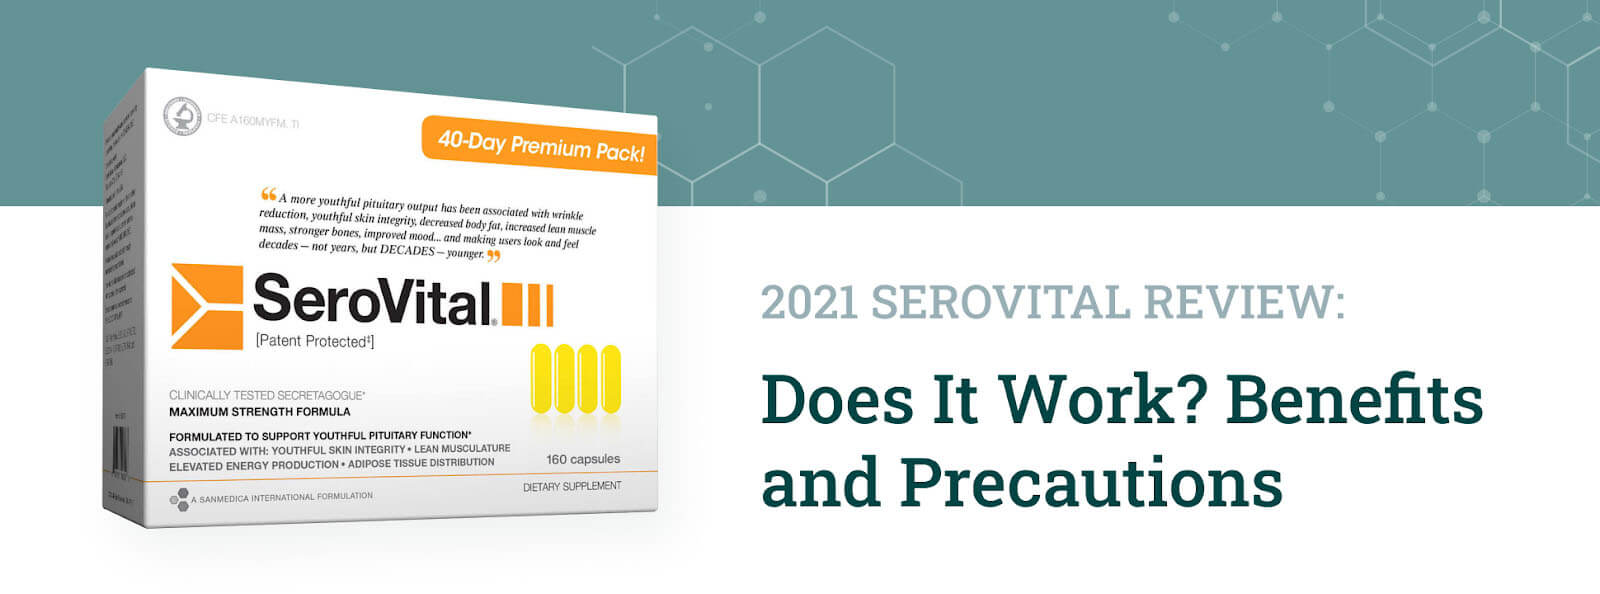 2021 SeroVital Review: Does It Work? Benefits and Precautions - Farr  Institute